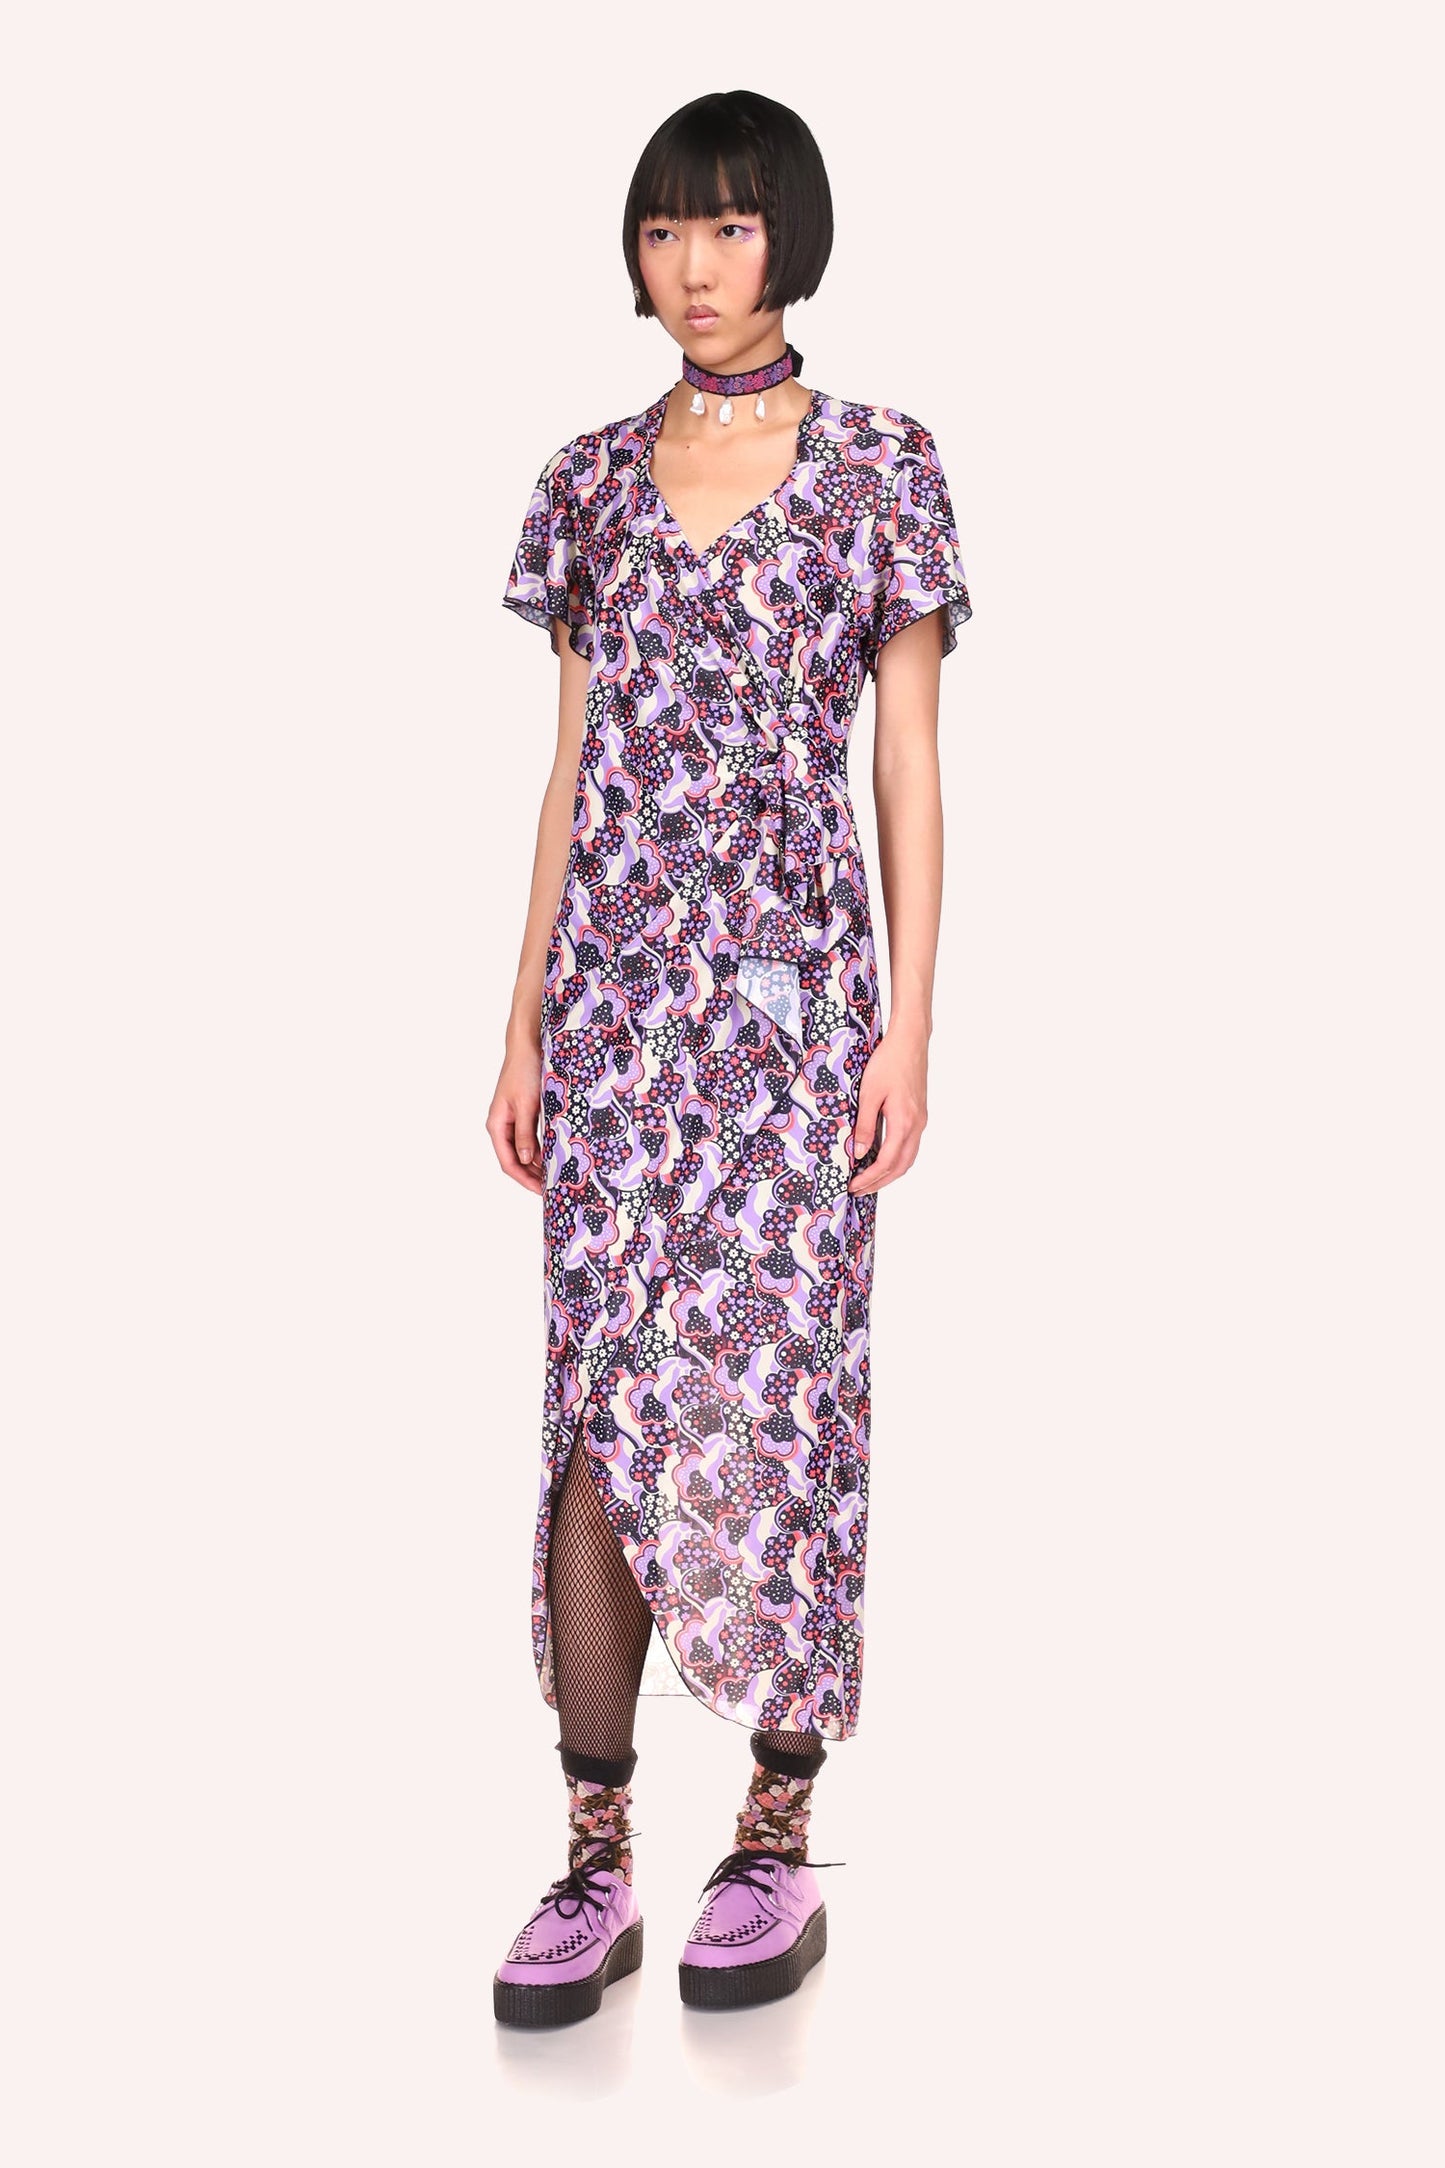 Wavy Clouds Wrap Dress Lavender, tied on the left side to create a ruffled effect